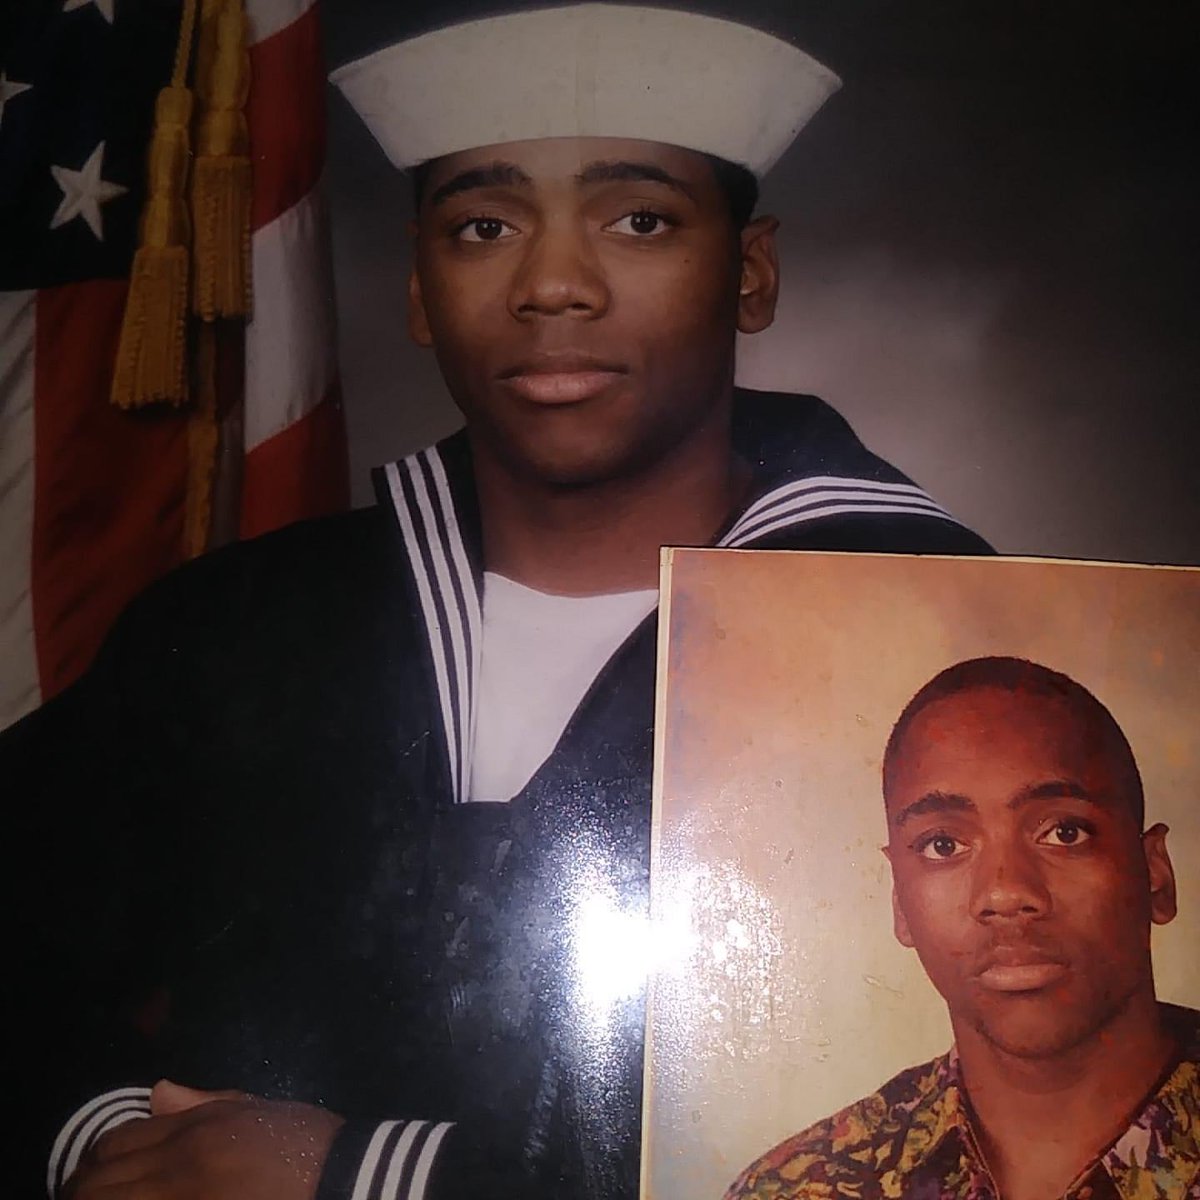 I would like to wish a Happy Veterans Day to my dad #thespeedking #speedfactorytraining #apextraining @USNavy #CorpsmanUp